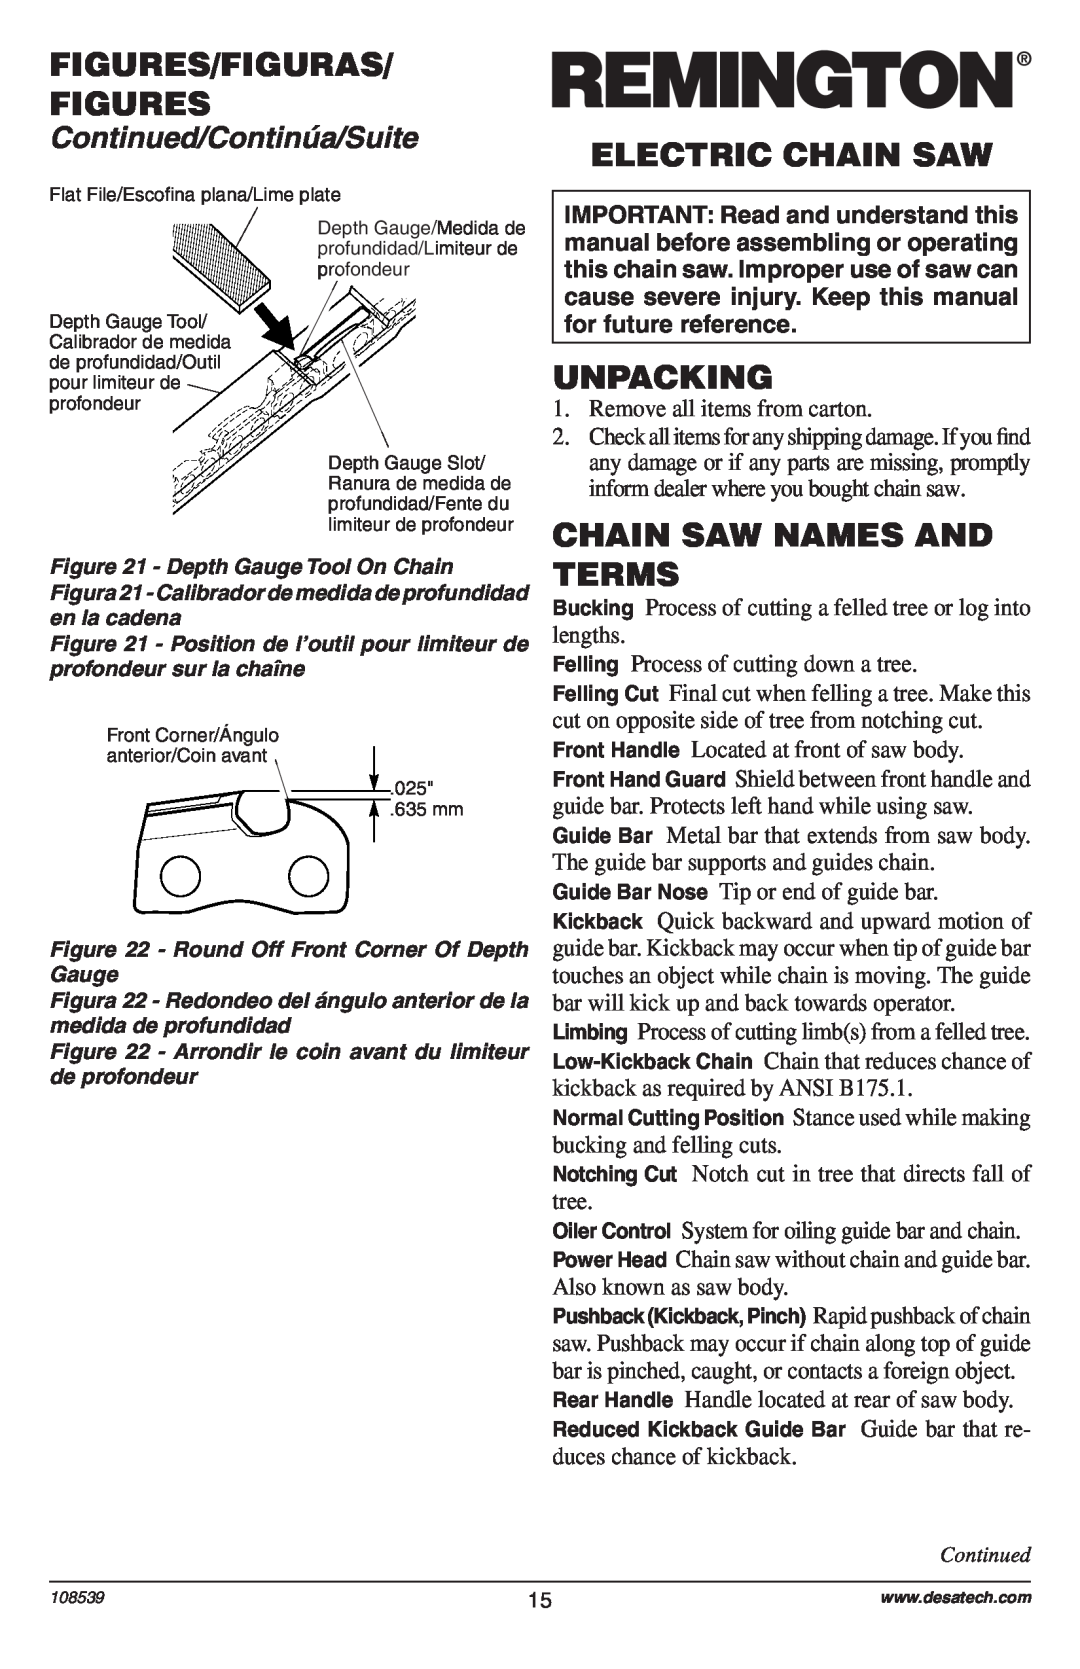 Remington Power Tools 106890-01 Electric Chain Saw, Unpacking, Chain Saw Names And Terms, Figures/Figuras Figures 